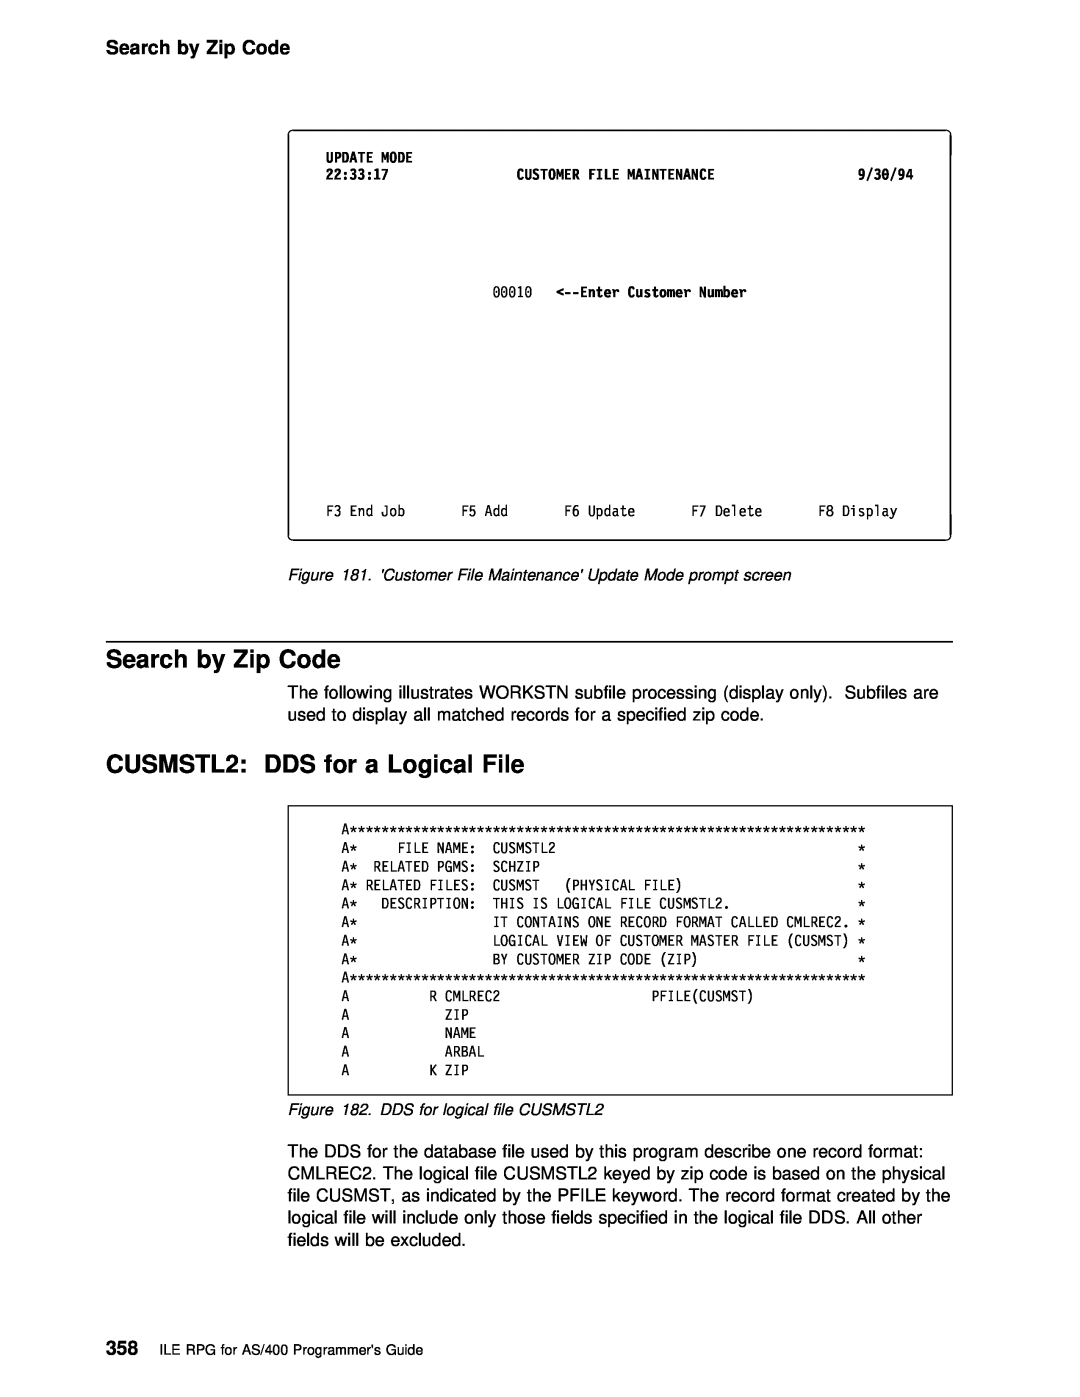 IBM AS/400 manual Search by Zip Code, File 